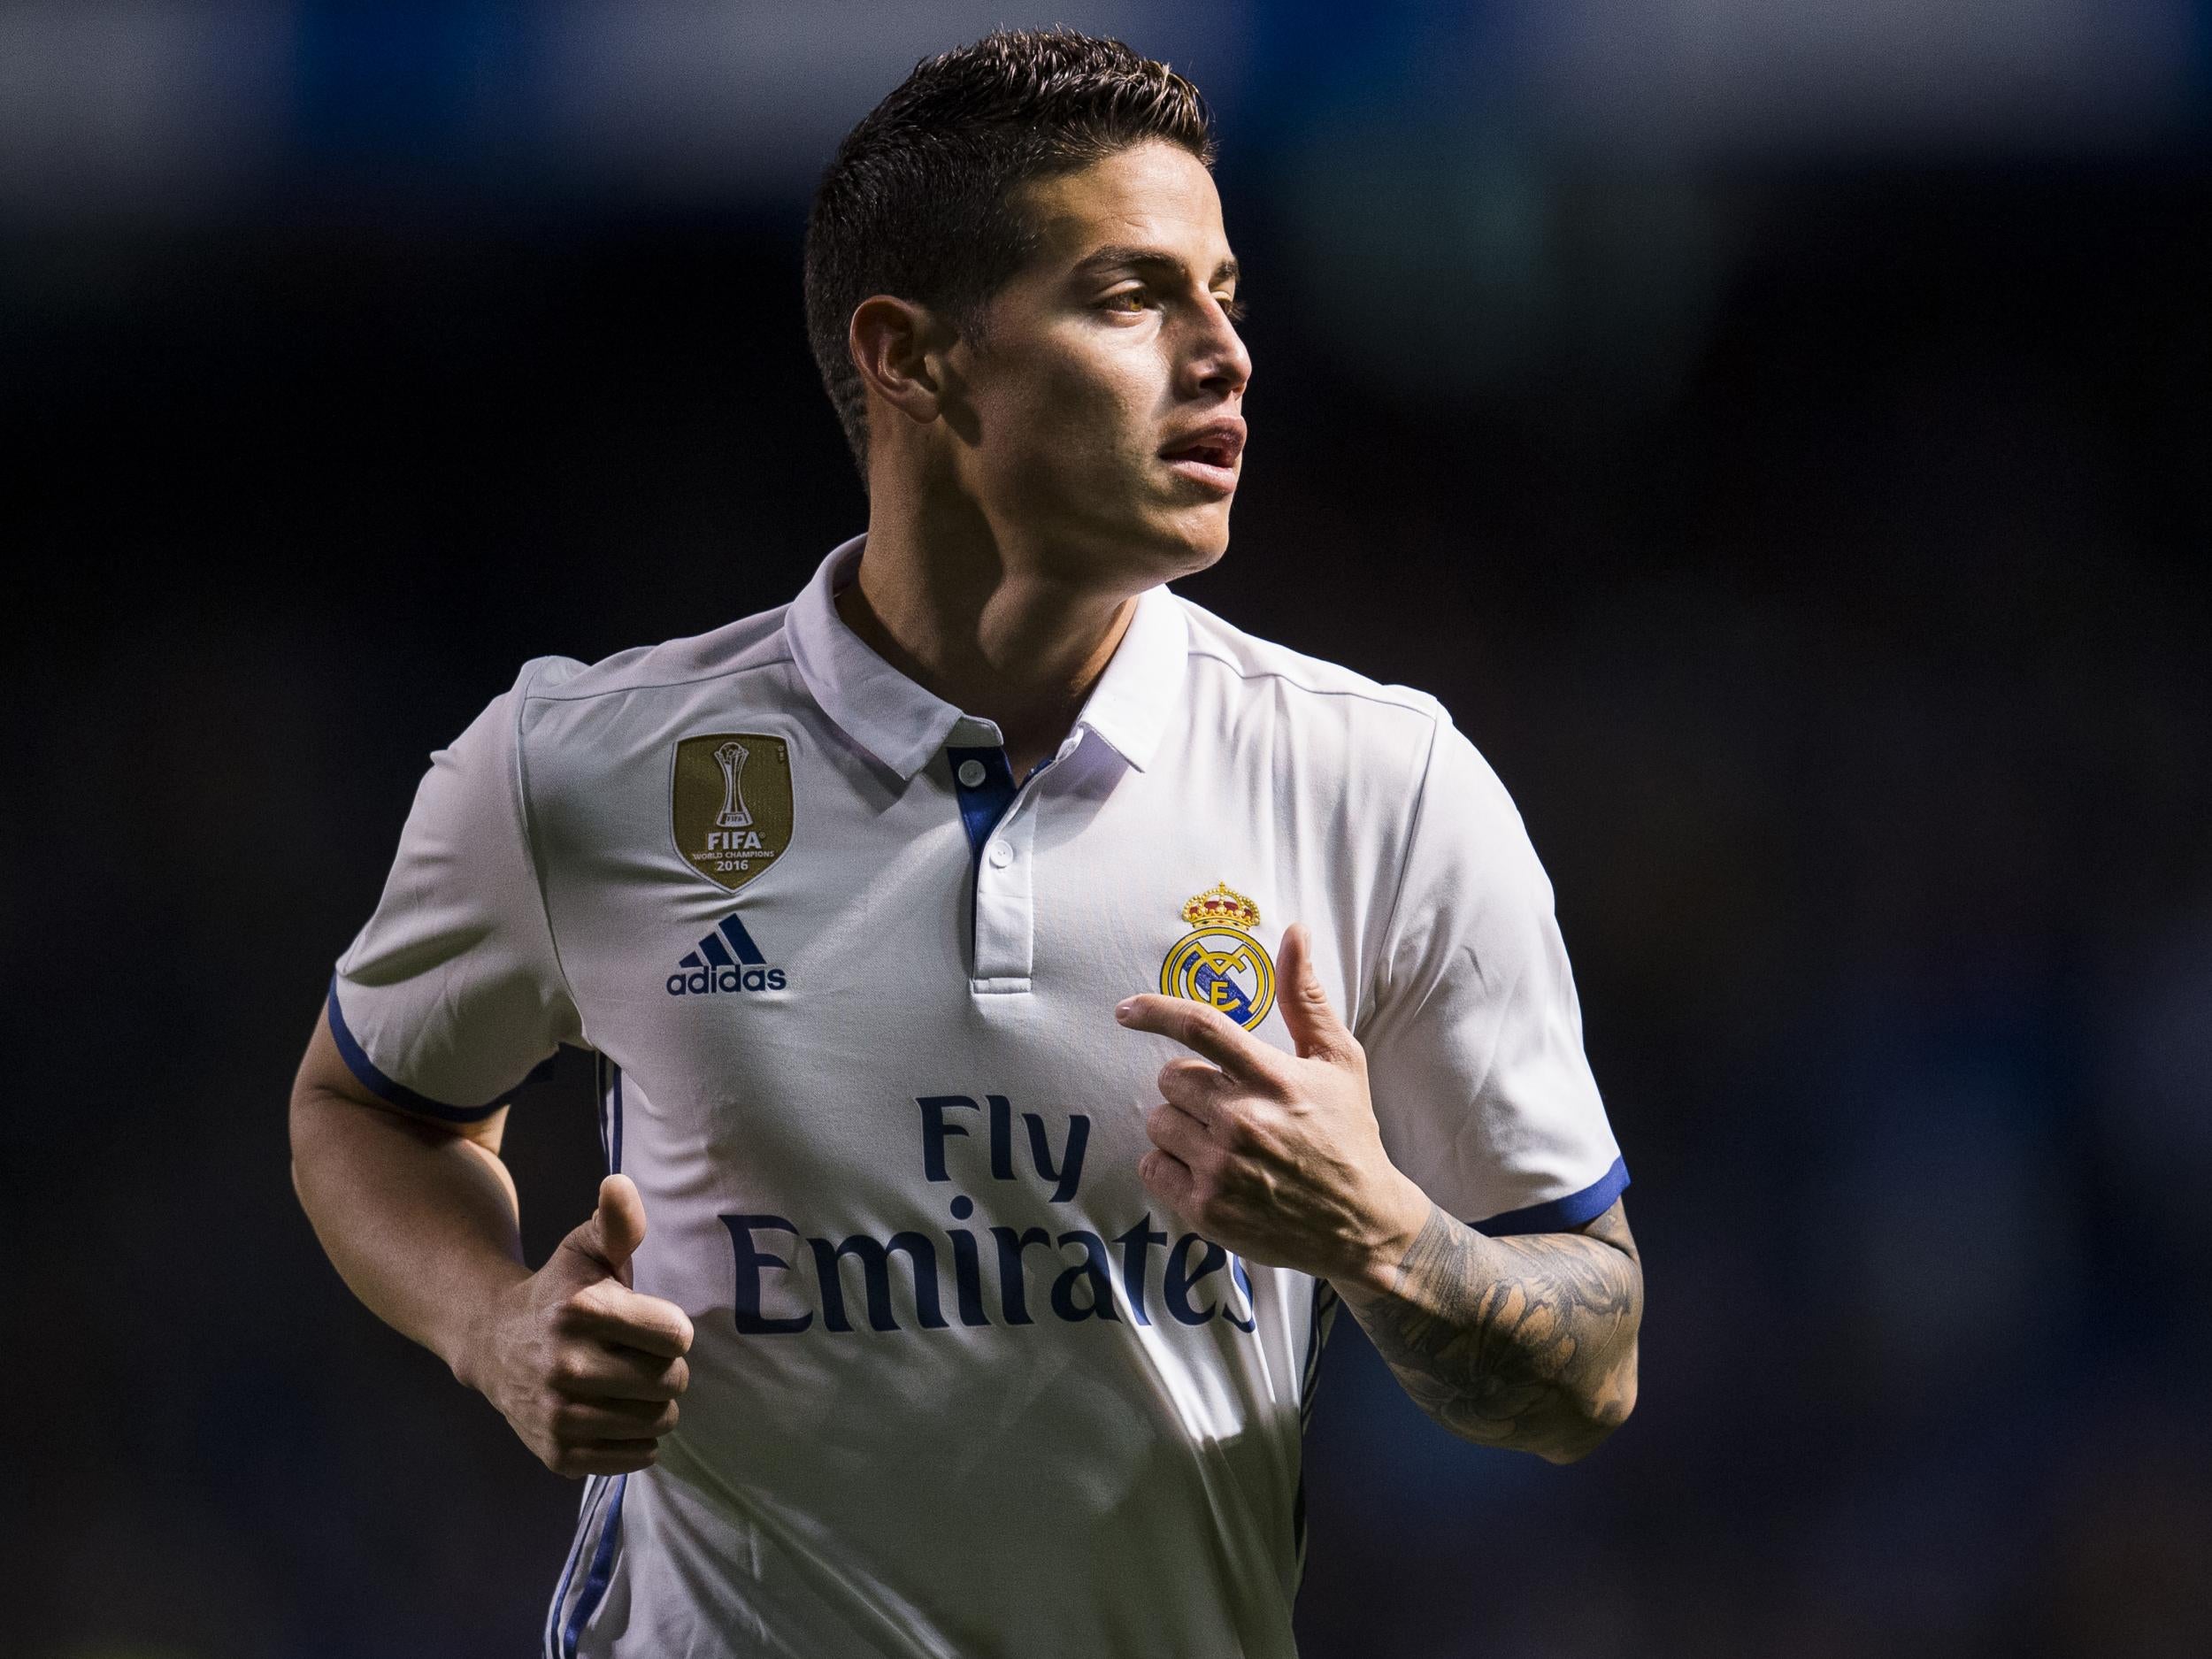 James has struggled to break though into Real's first team under successive managers